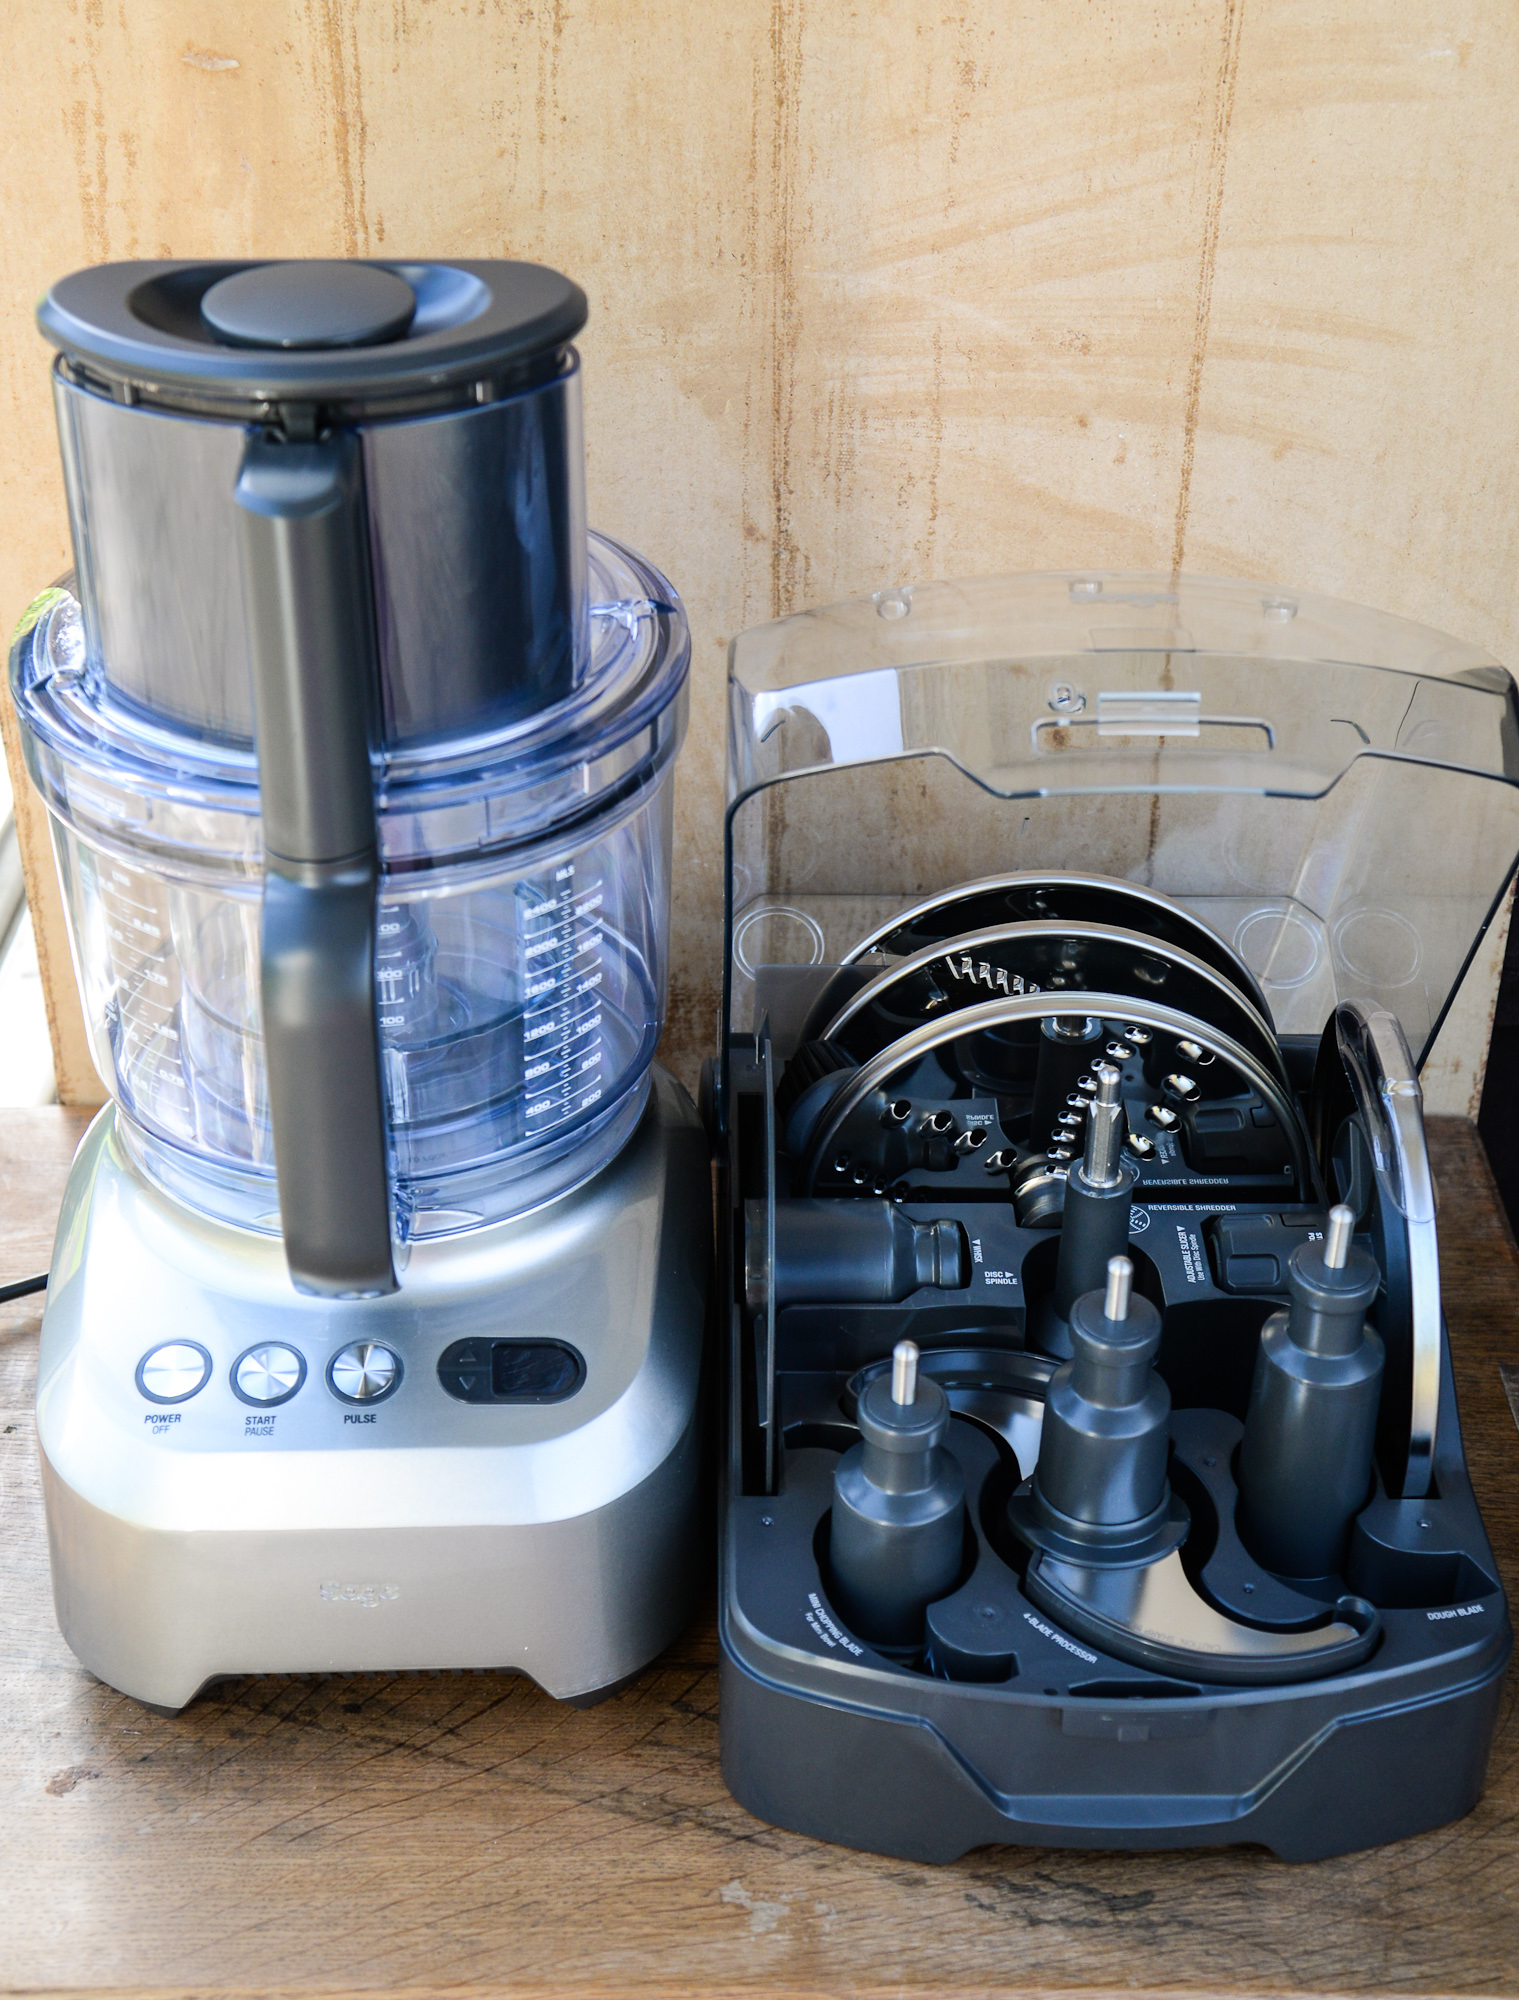 MultiPro Home Food Processor – Silver – National Product Review